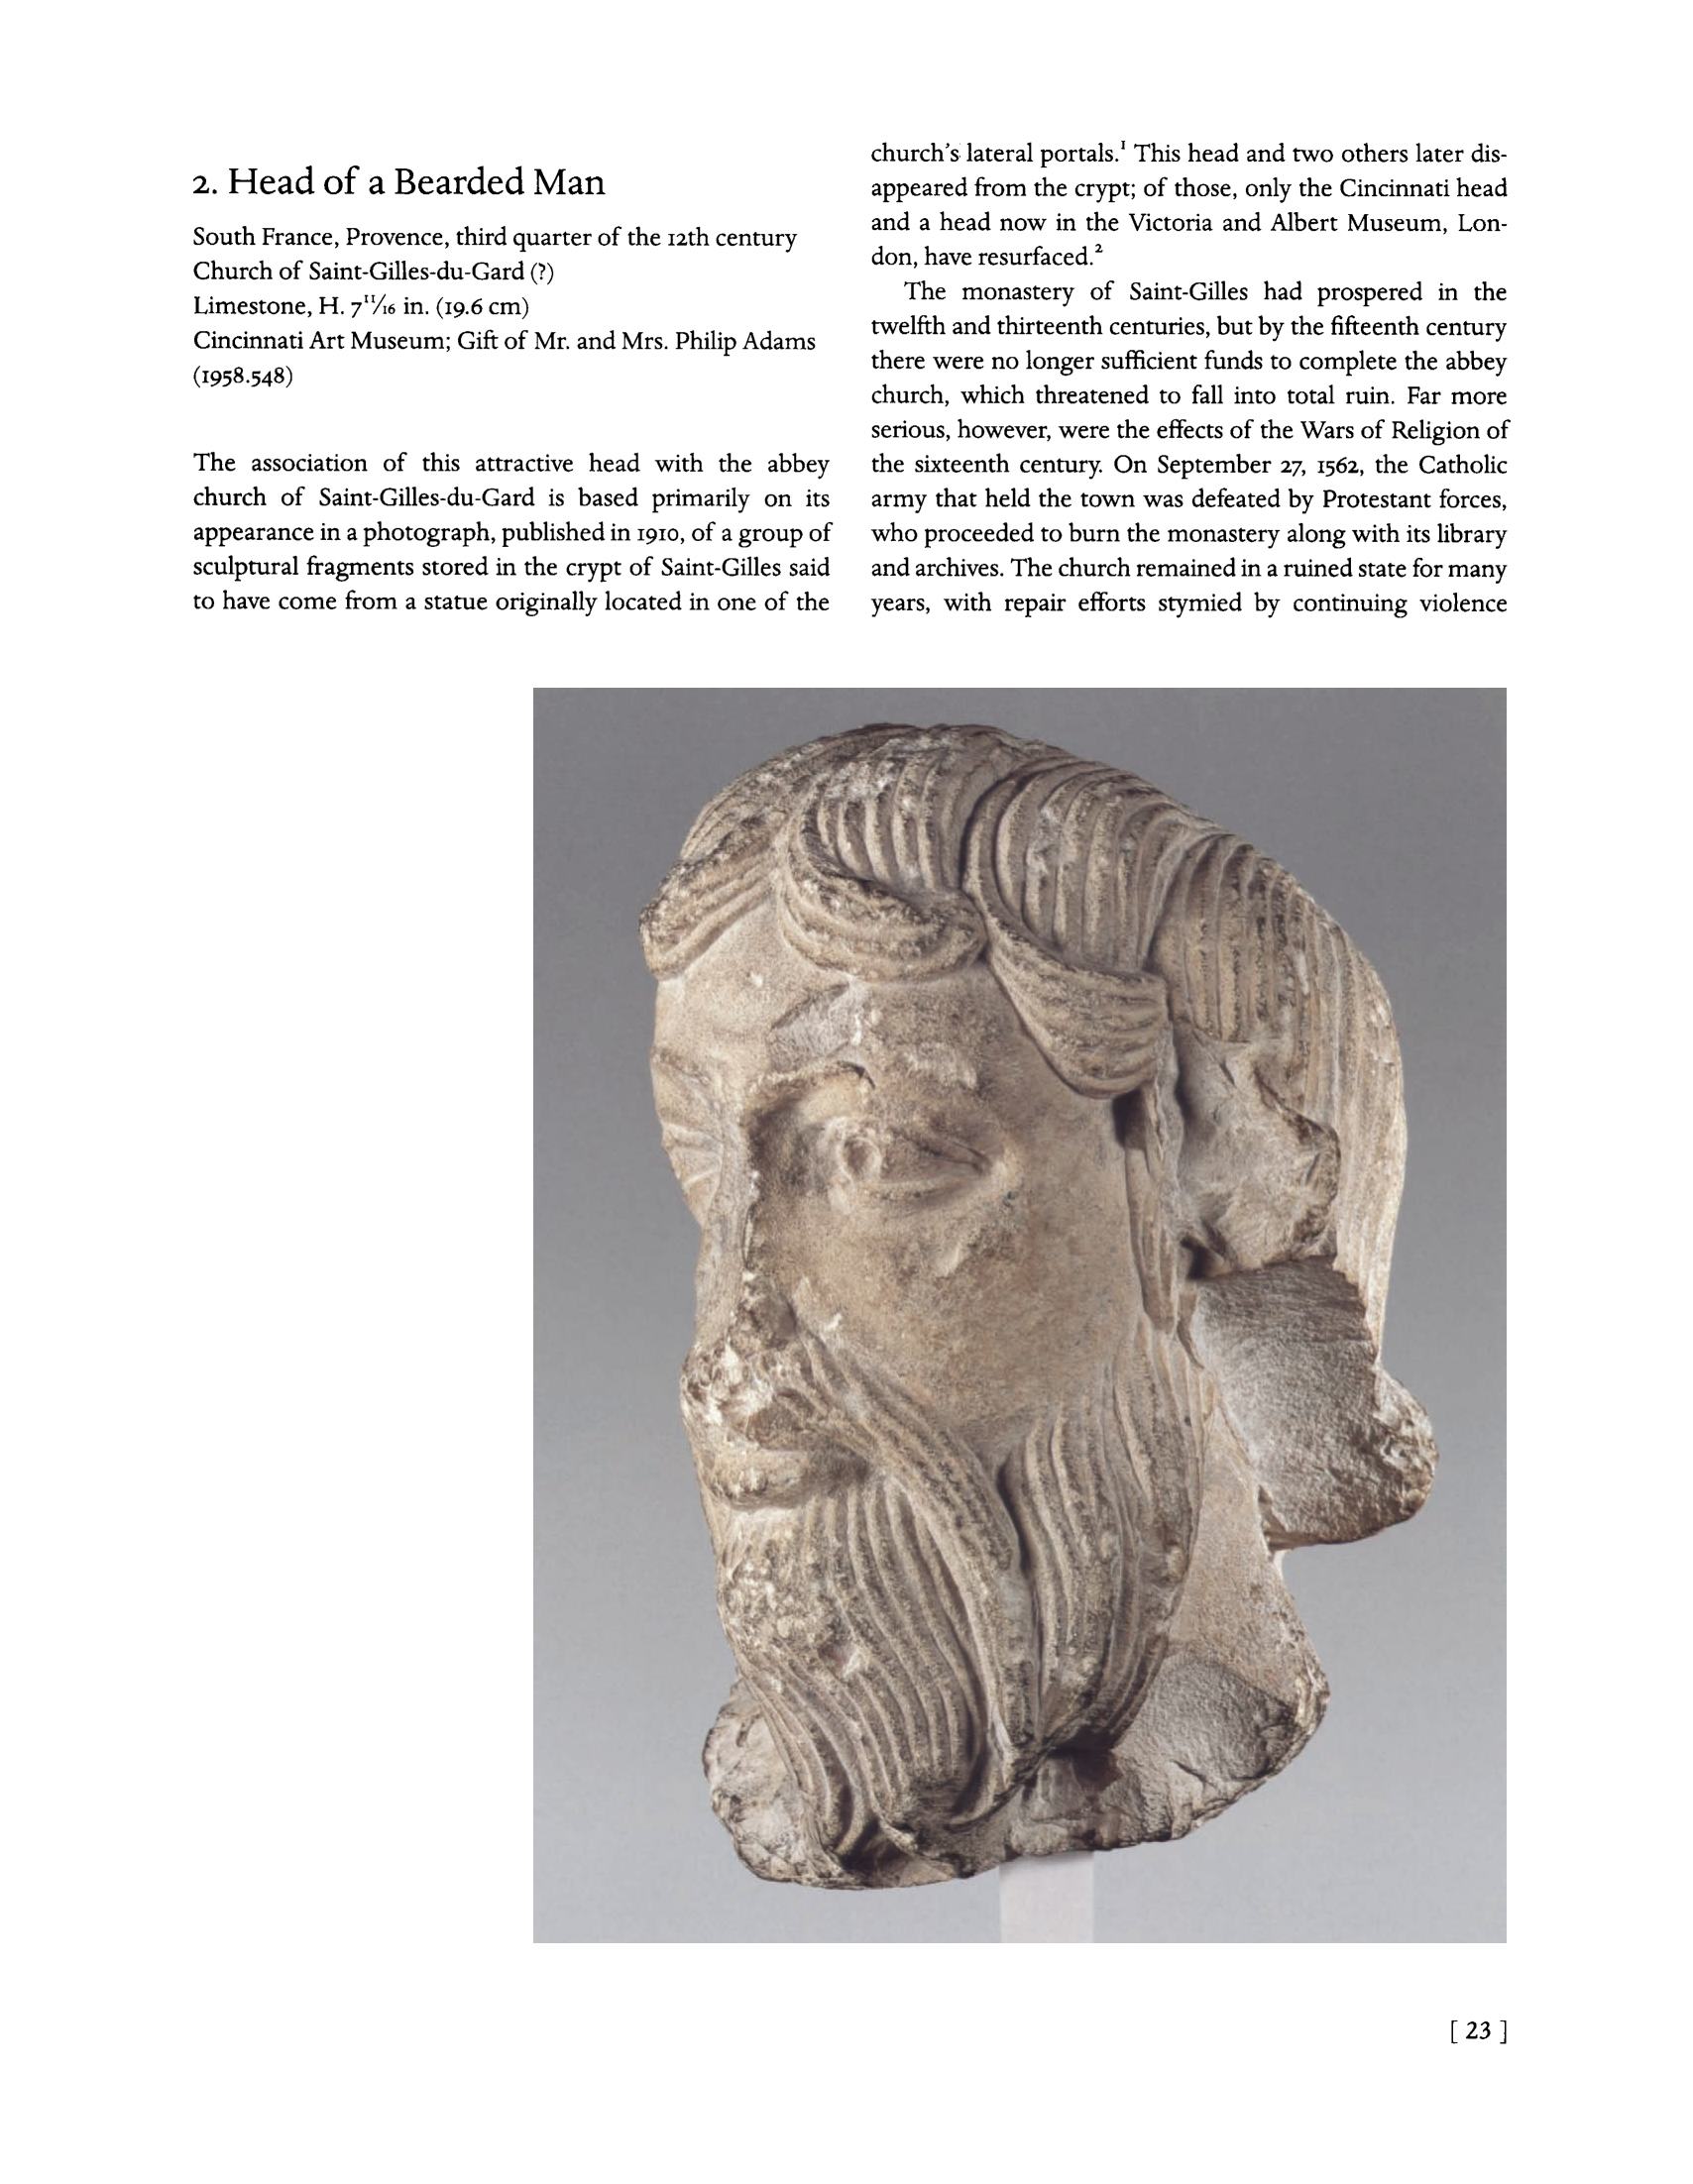 Set in Stone: The Face in Medieval Sculpture